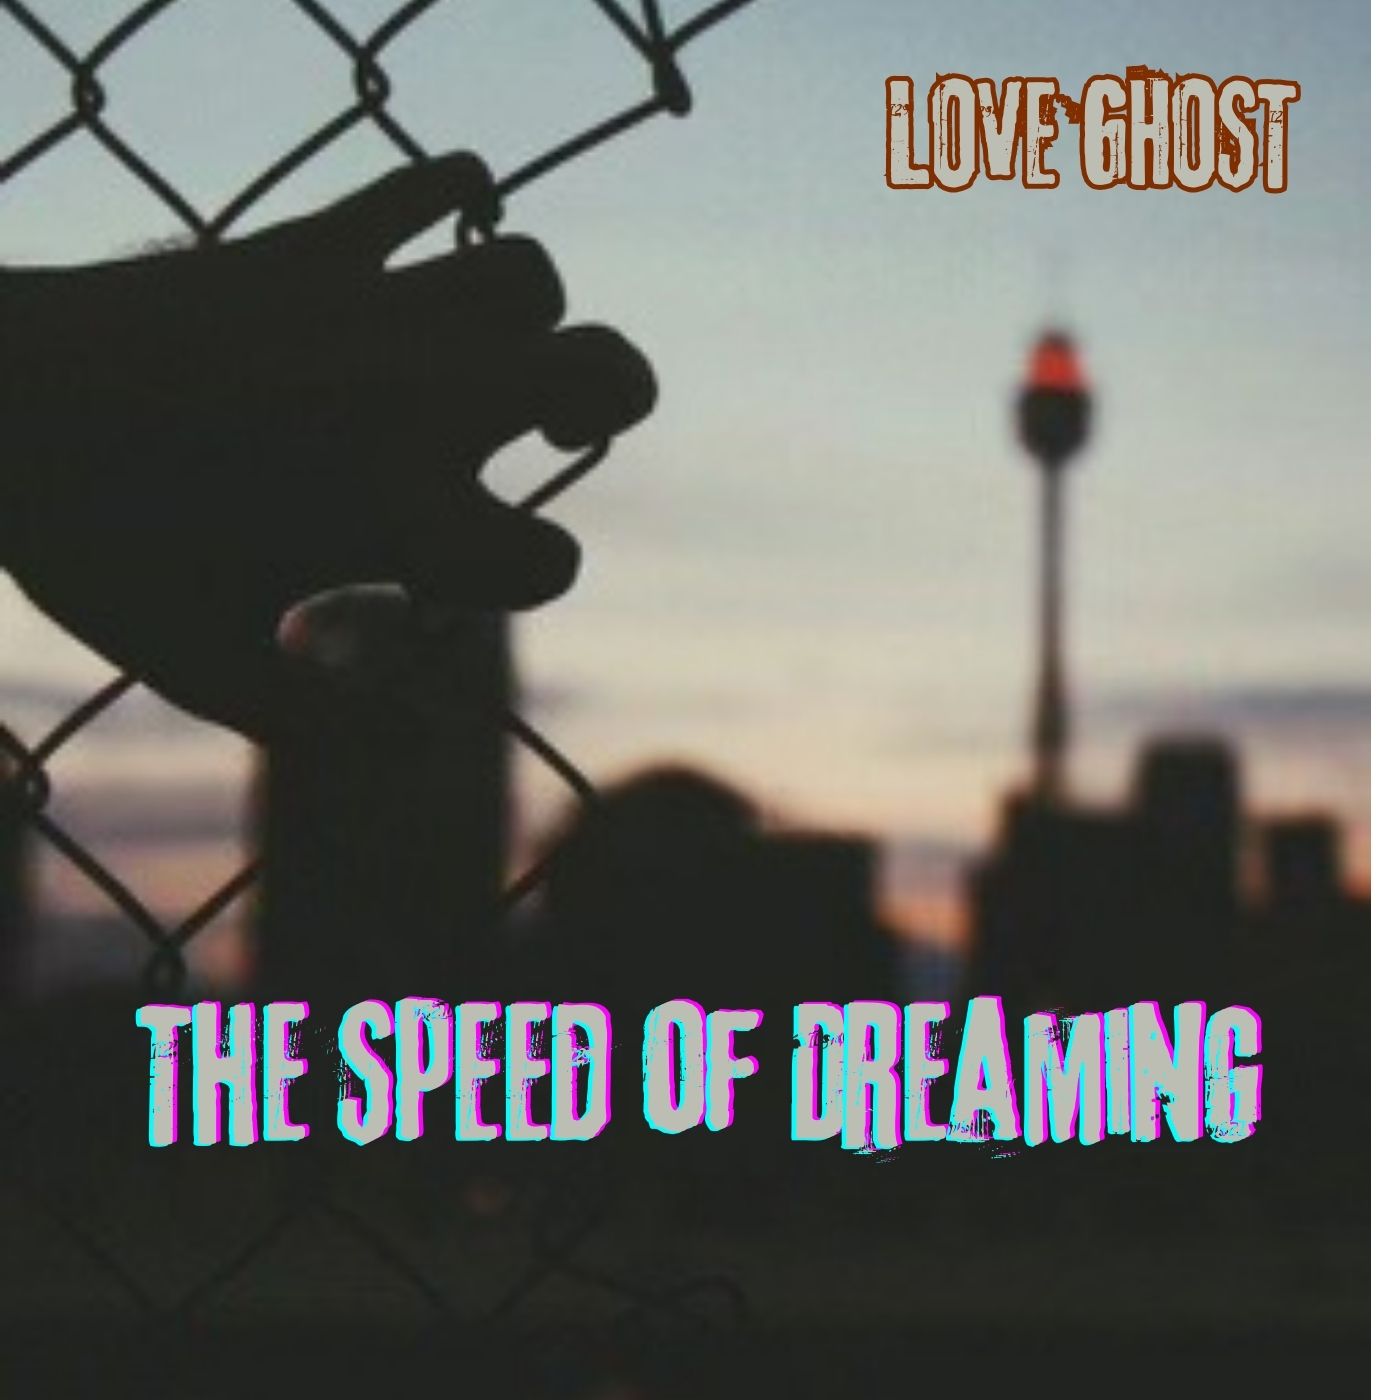 The Speed of Dreaming EP by Love Ghost cover art